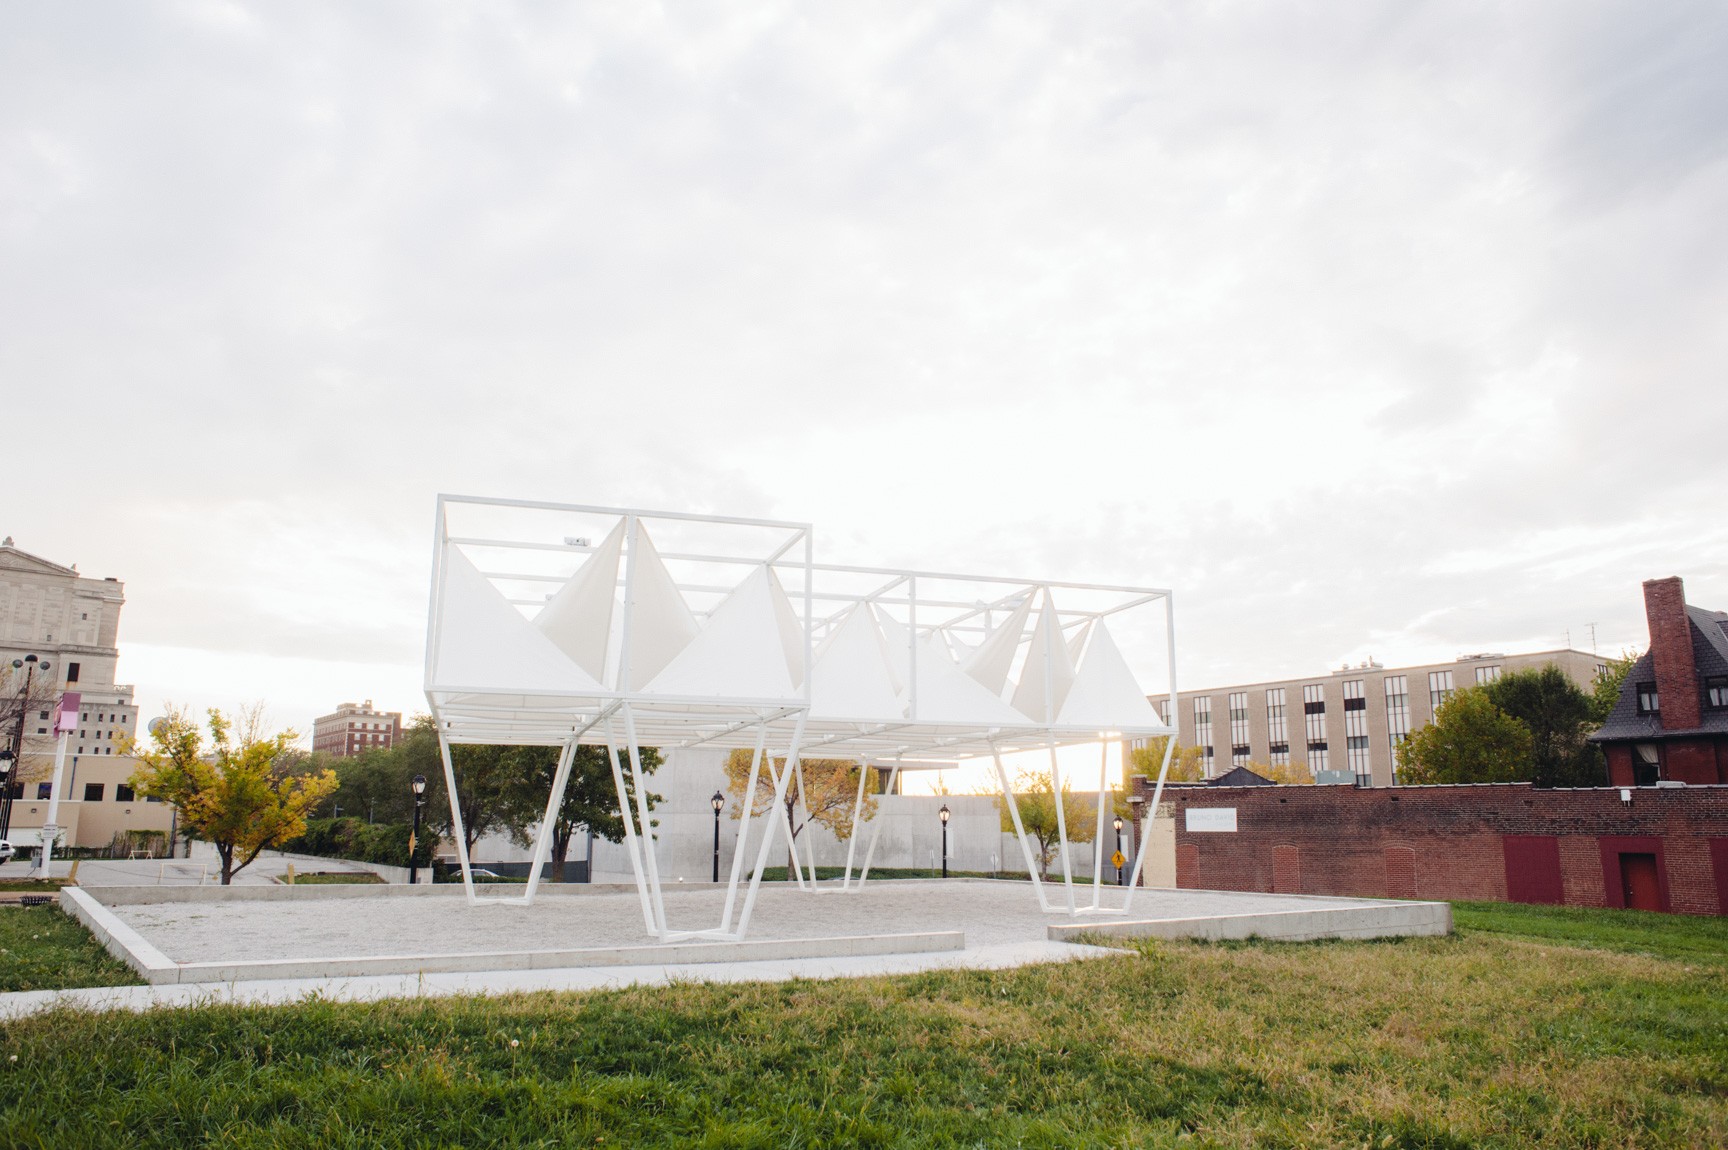 A clear view of the Lots installation, a geometric white sculpture with white triangular fabric pieces attached tautly to the structure's overhead beams.